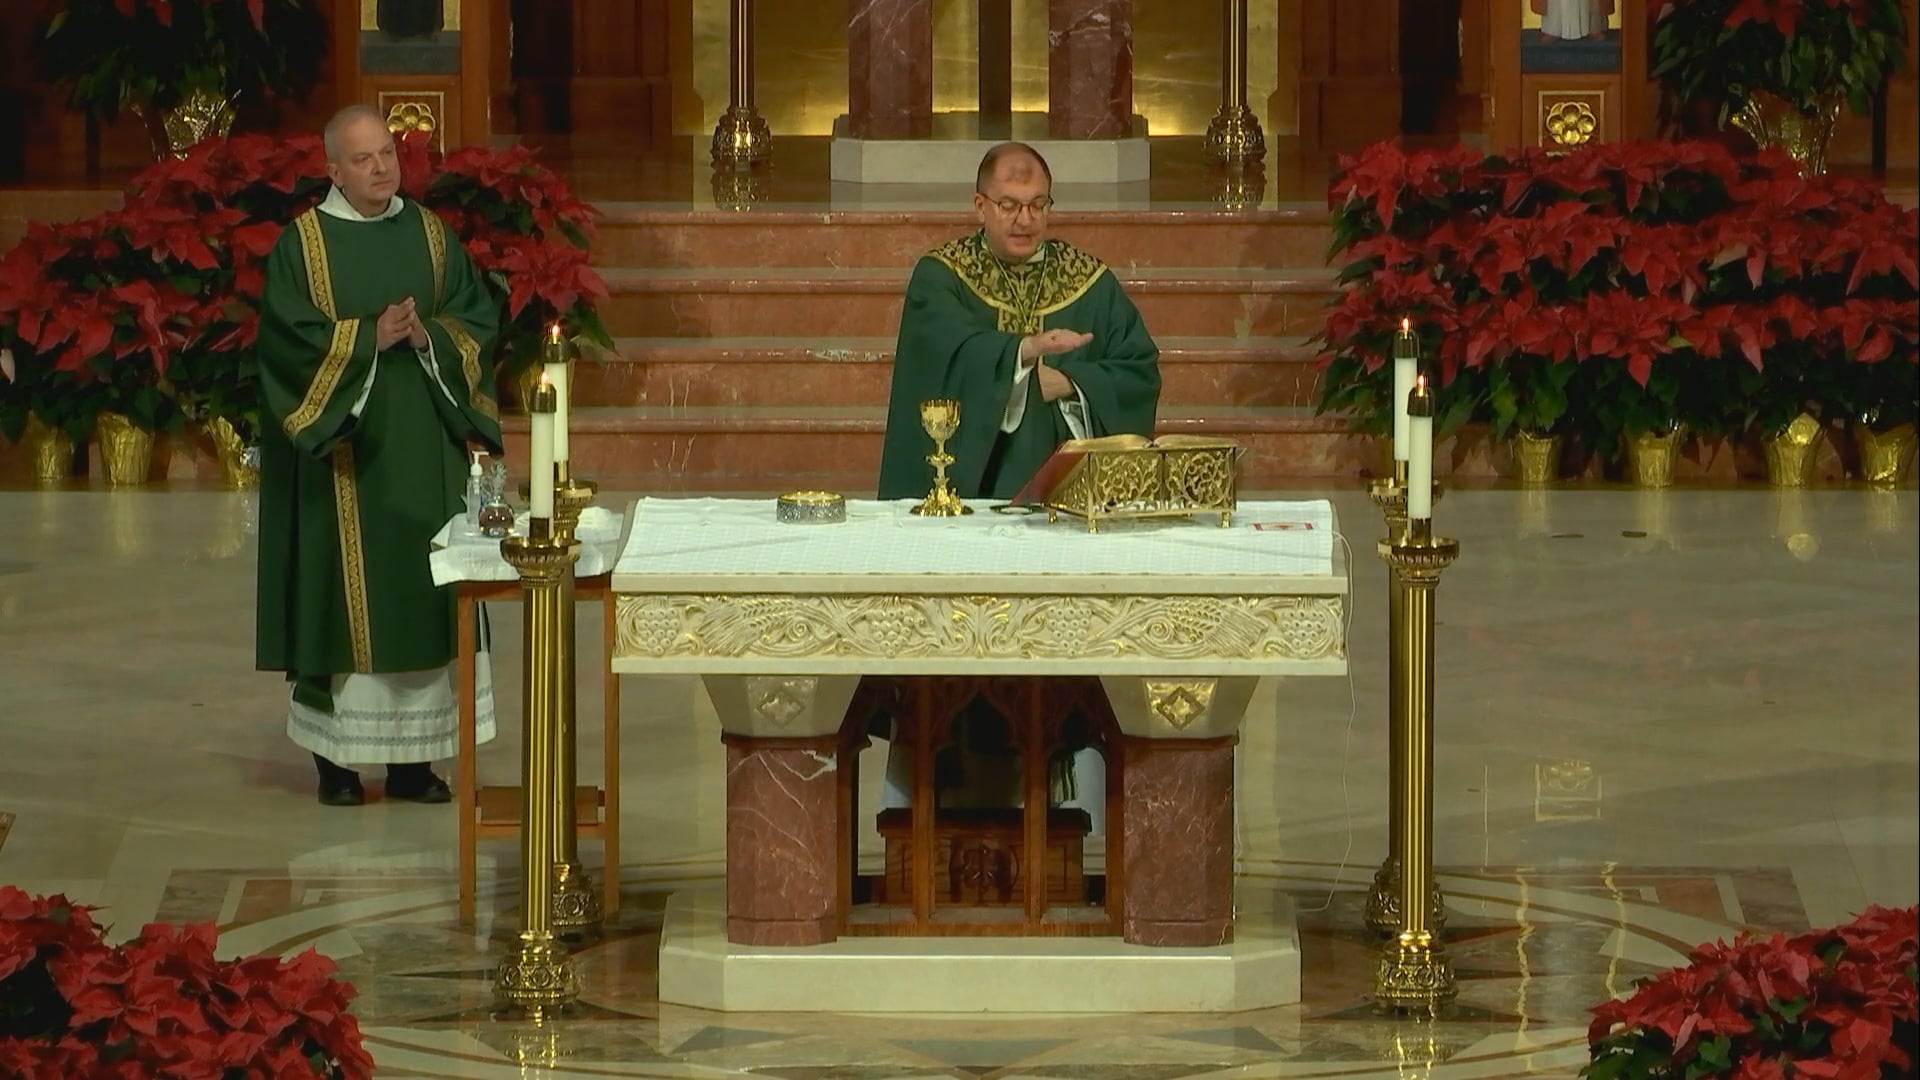 Mass from St. Agnes Cathedral - January 18, 2023